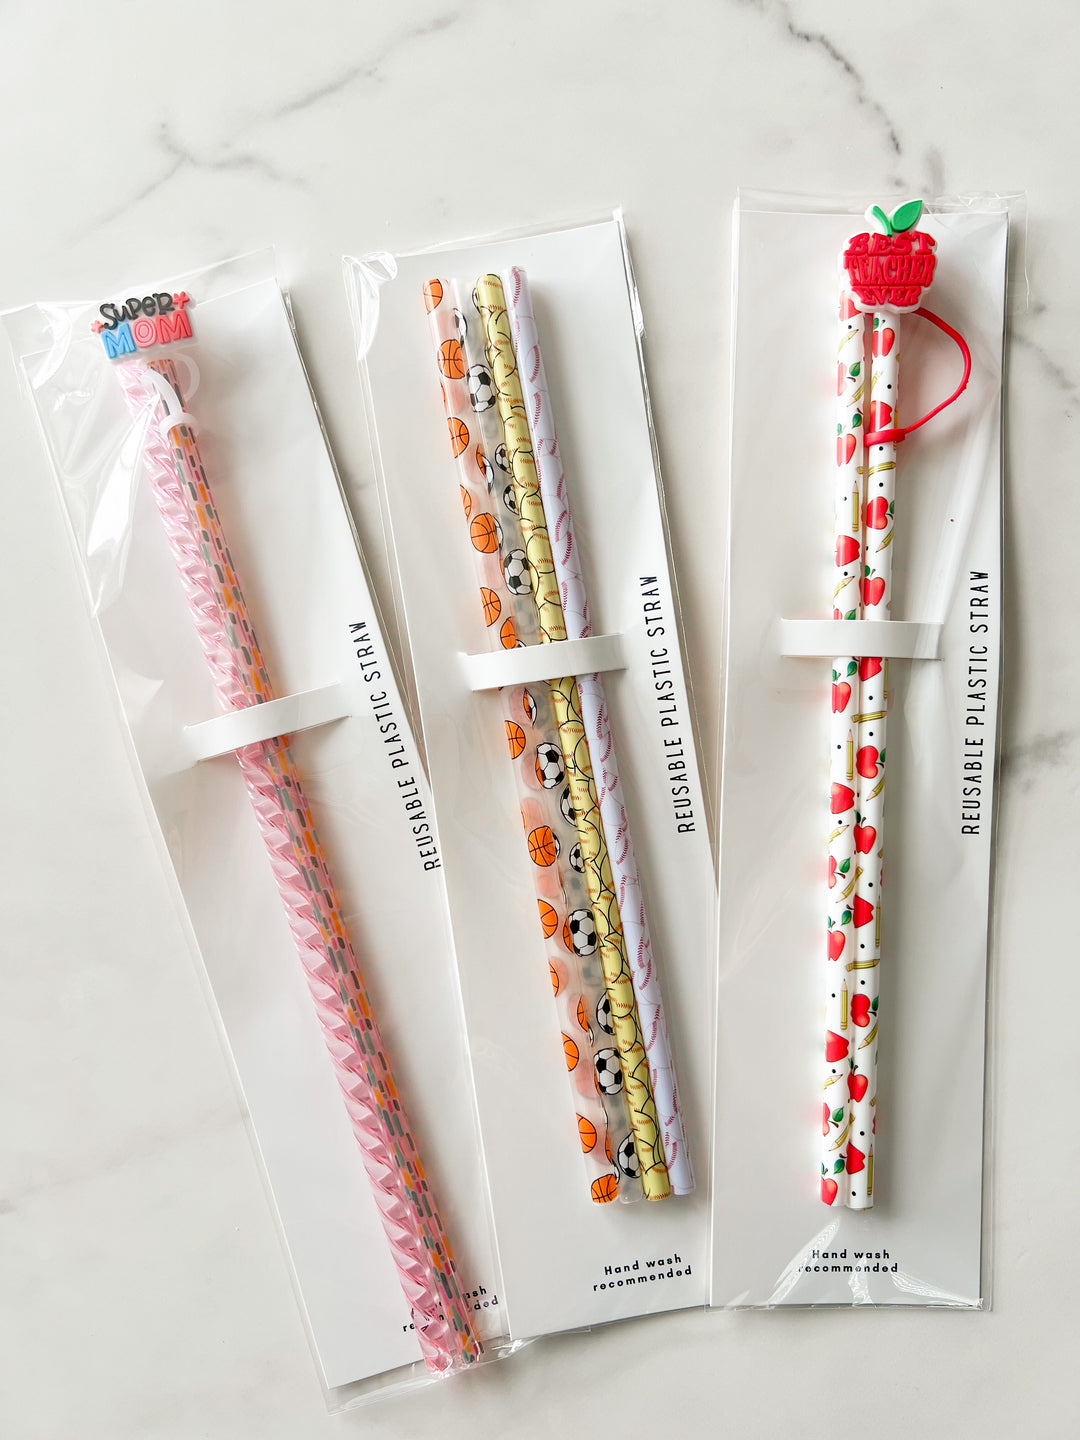 Straw packaging